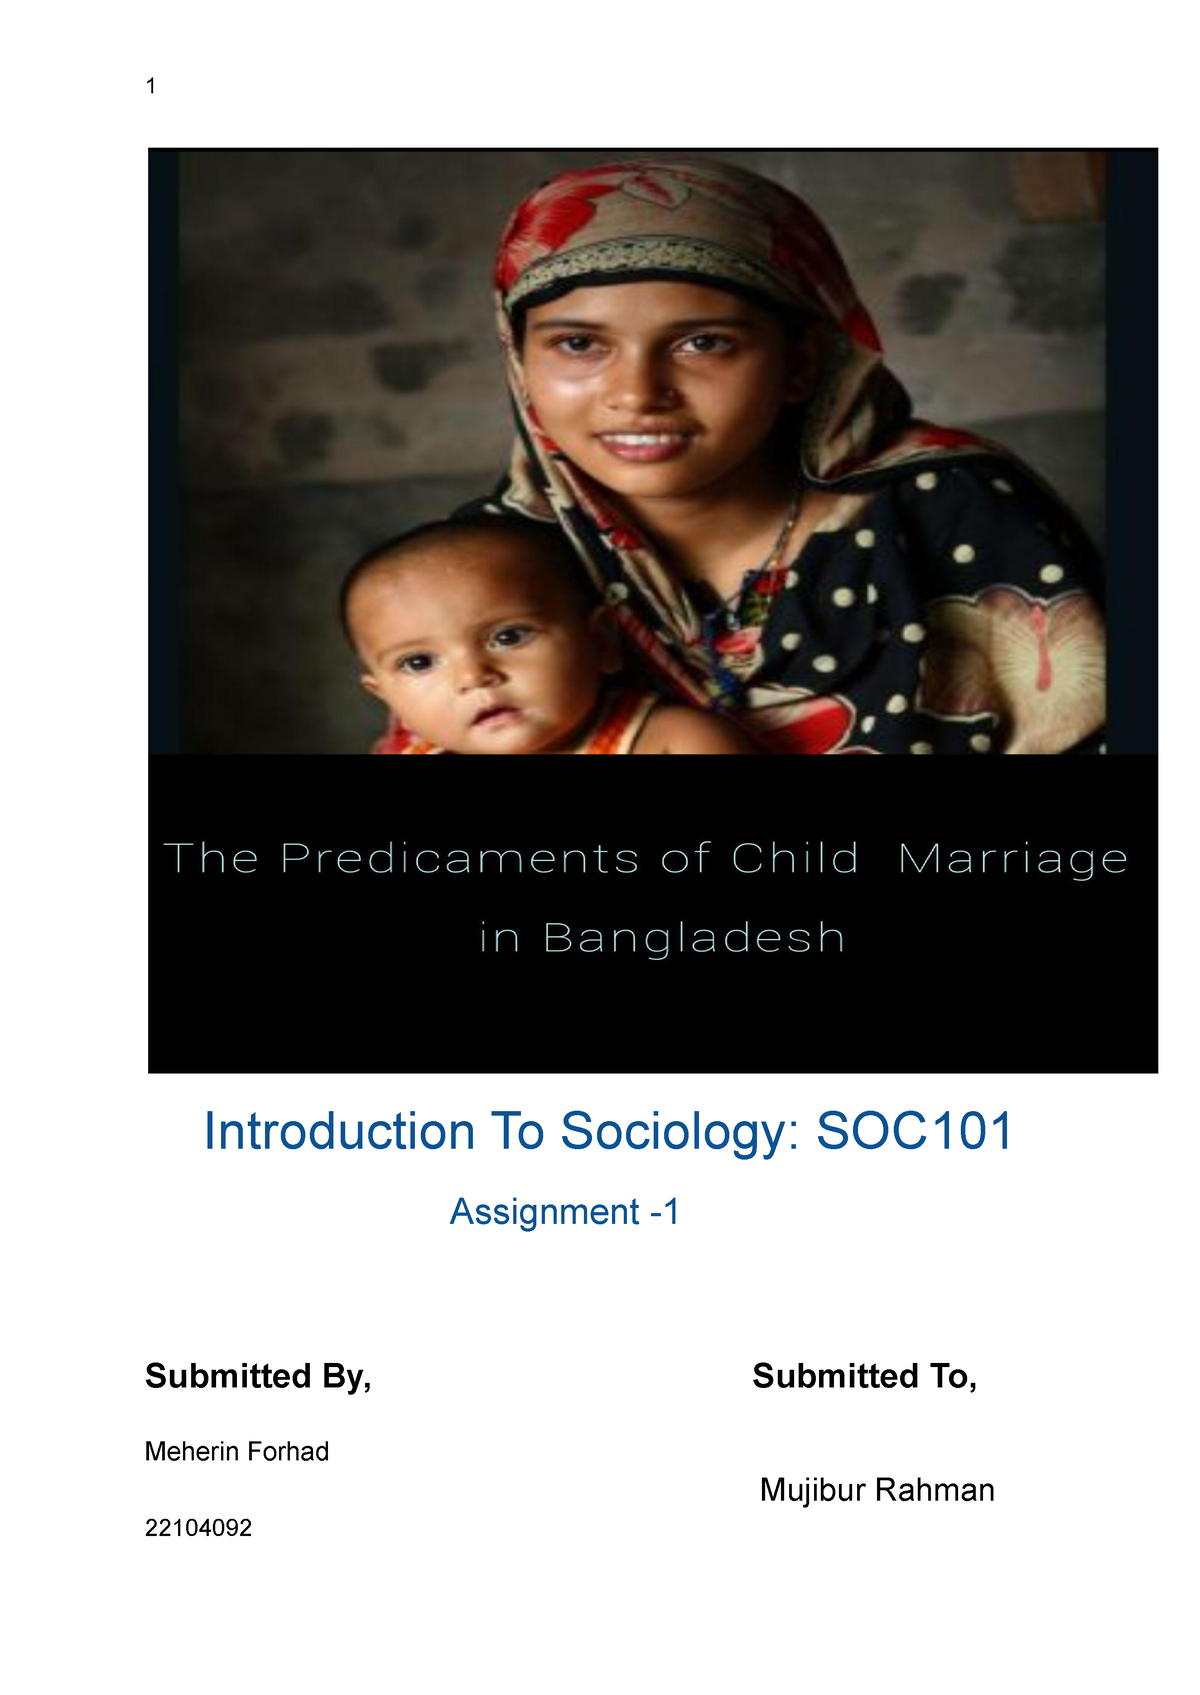 assignment on child marriage